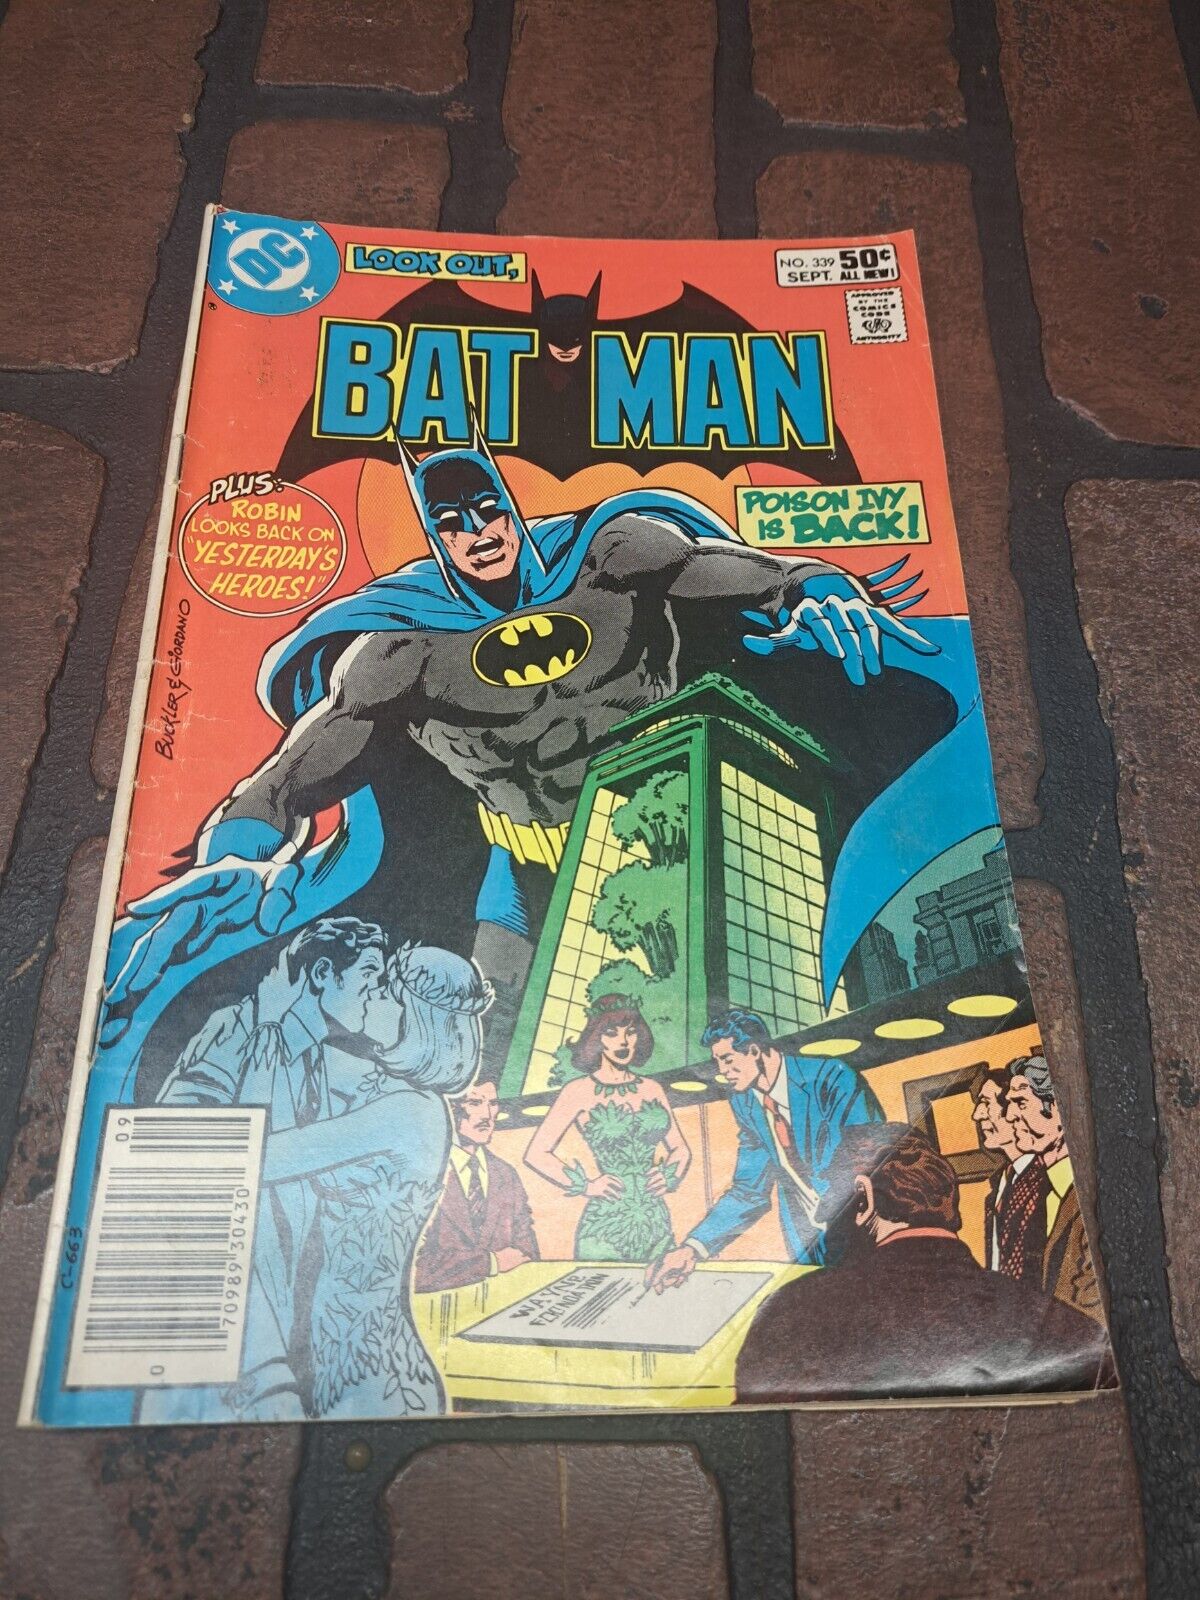 BATMAN #339 1981 POISON IVY COVER & APPEARANCE Lower Grade